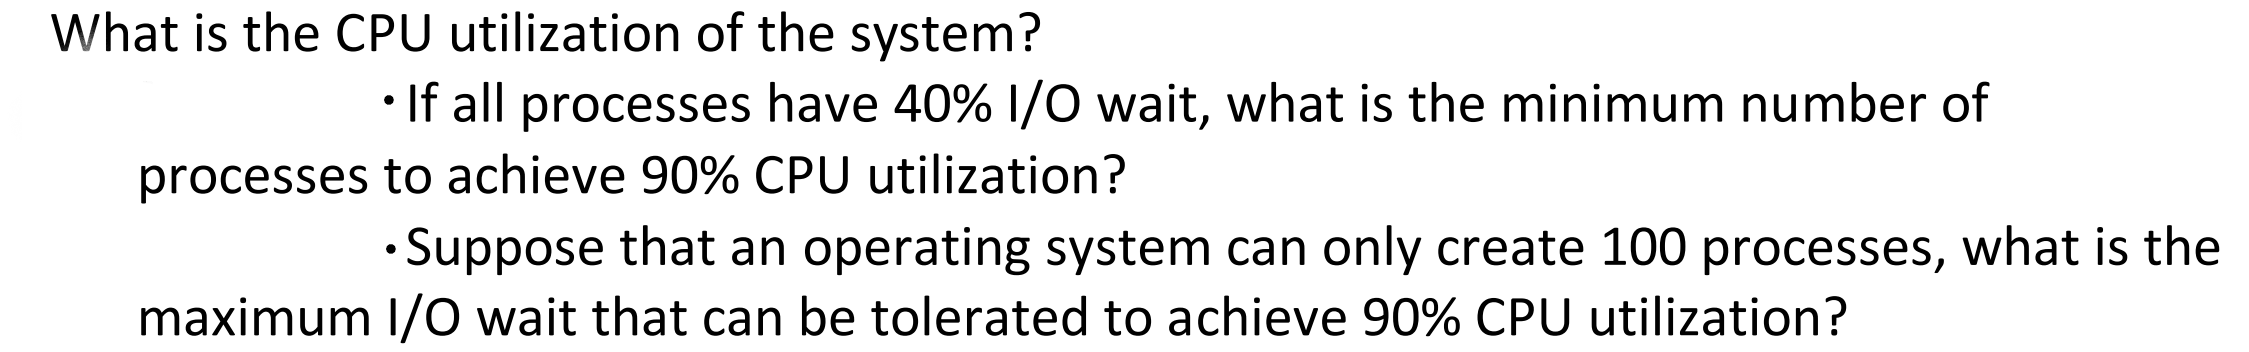 What is the CPU utilization of the system?  If all processes have 40% I/O wait, what is the minimum number of